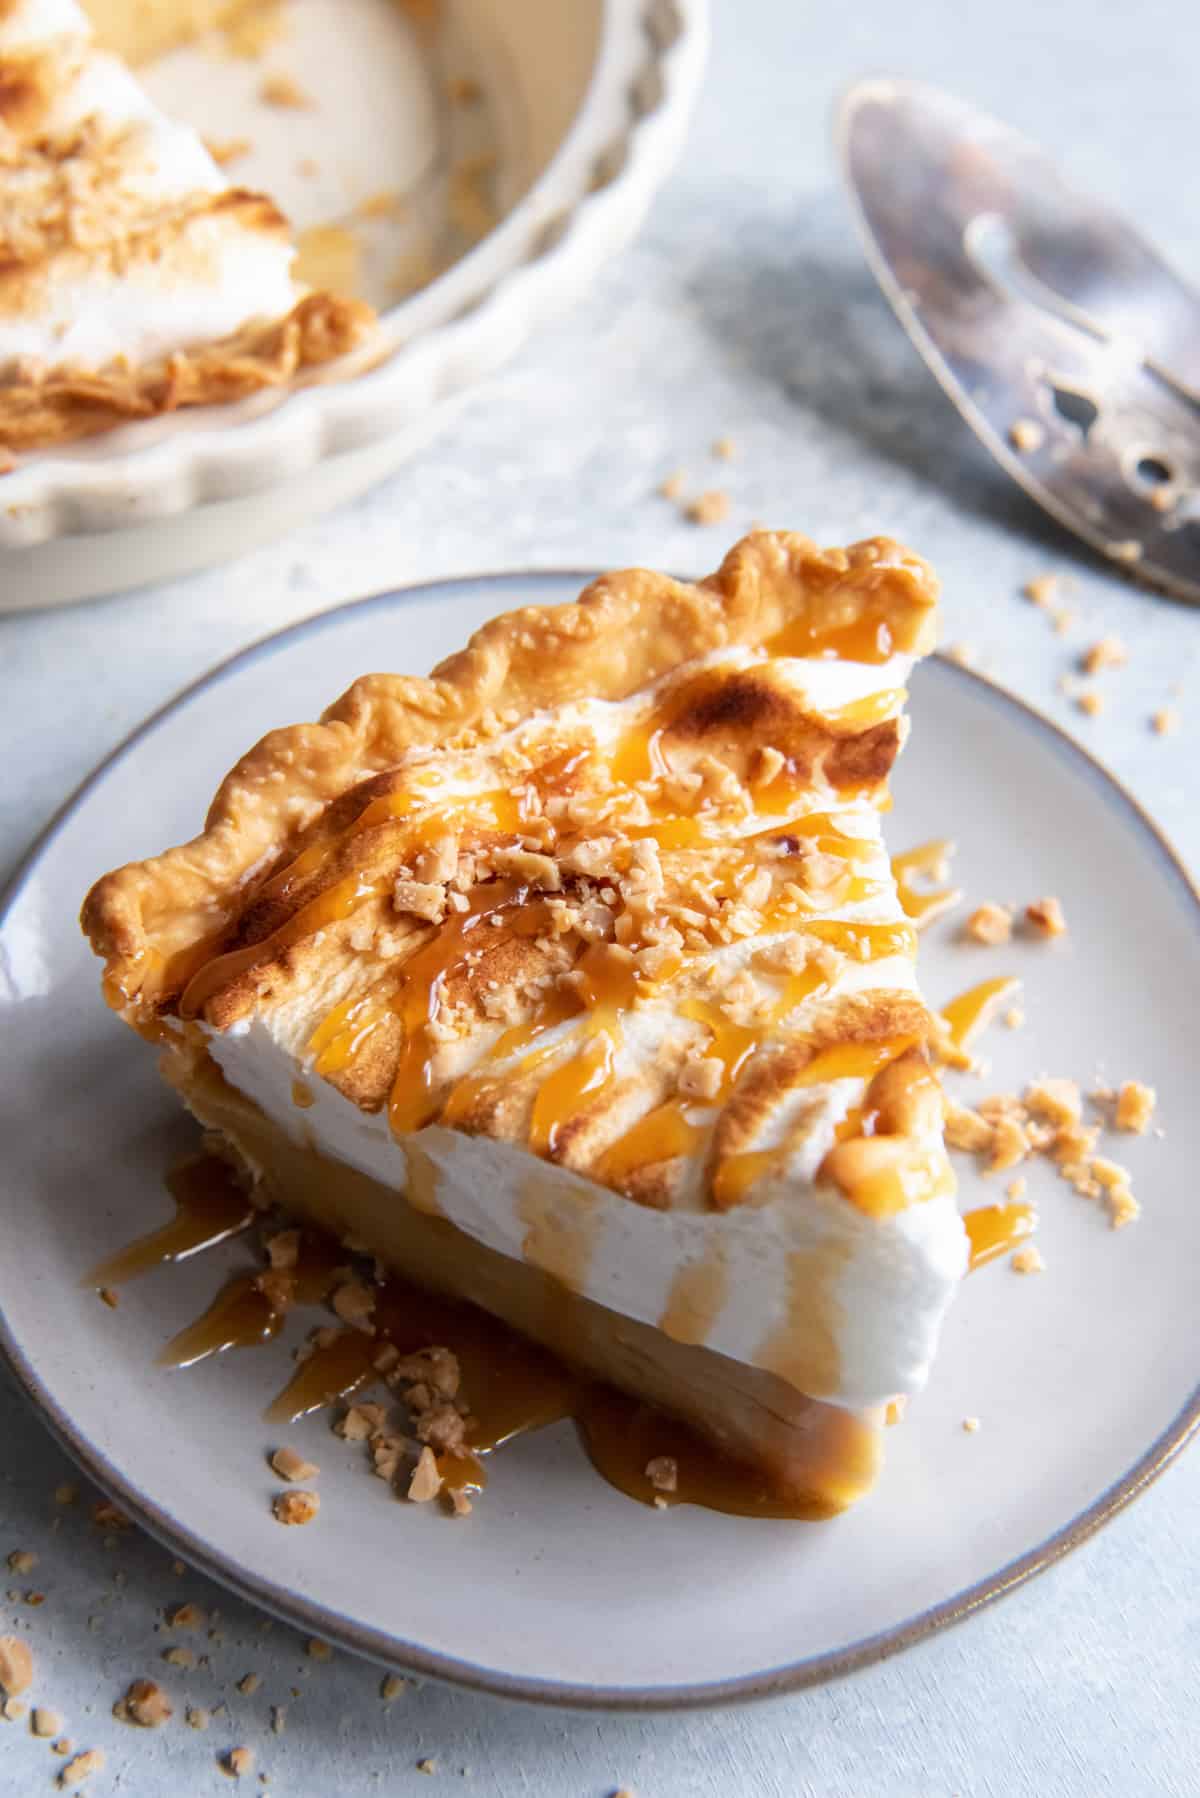 butterscotch pie with meringue topping and caramel sauce